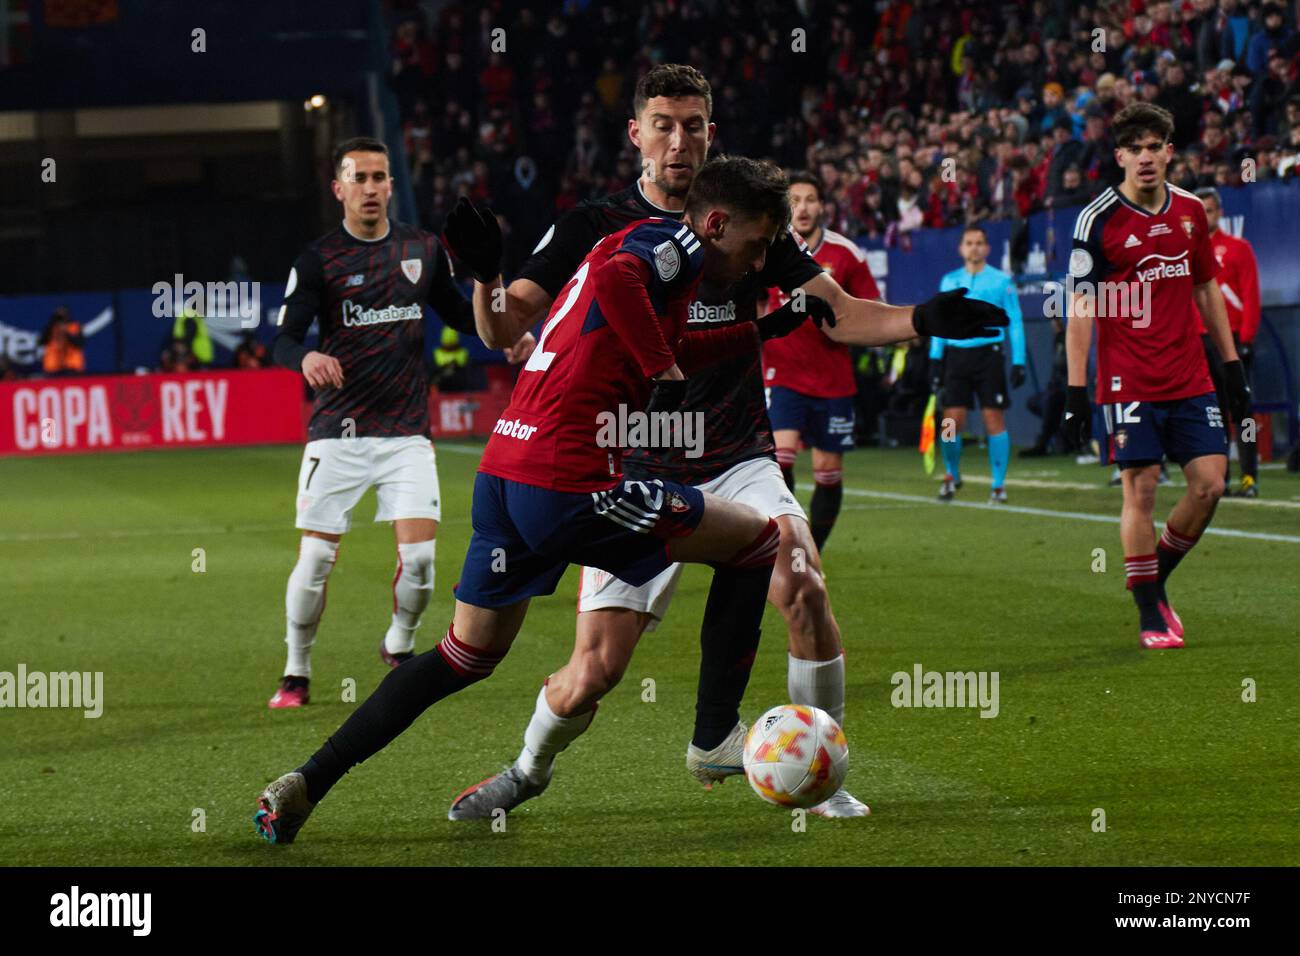 Pamplona, Spain. 1st Mar. 2023. Sports. Football/Soccer. Aimar Oroz (22. CA Osasuna) and De Marcos (18. Athletic Club) during the first leg football match of the semifinal of the Copa del Rey between CA Osasuna and Athletic Club played at El Sadar stadium in Pamplona (Spain) on March 1, 2023. Credit: Iñigo Alzugaray/Alamy Live News Stock Photo